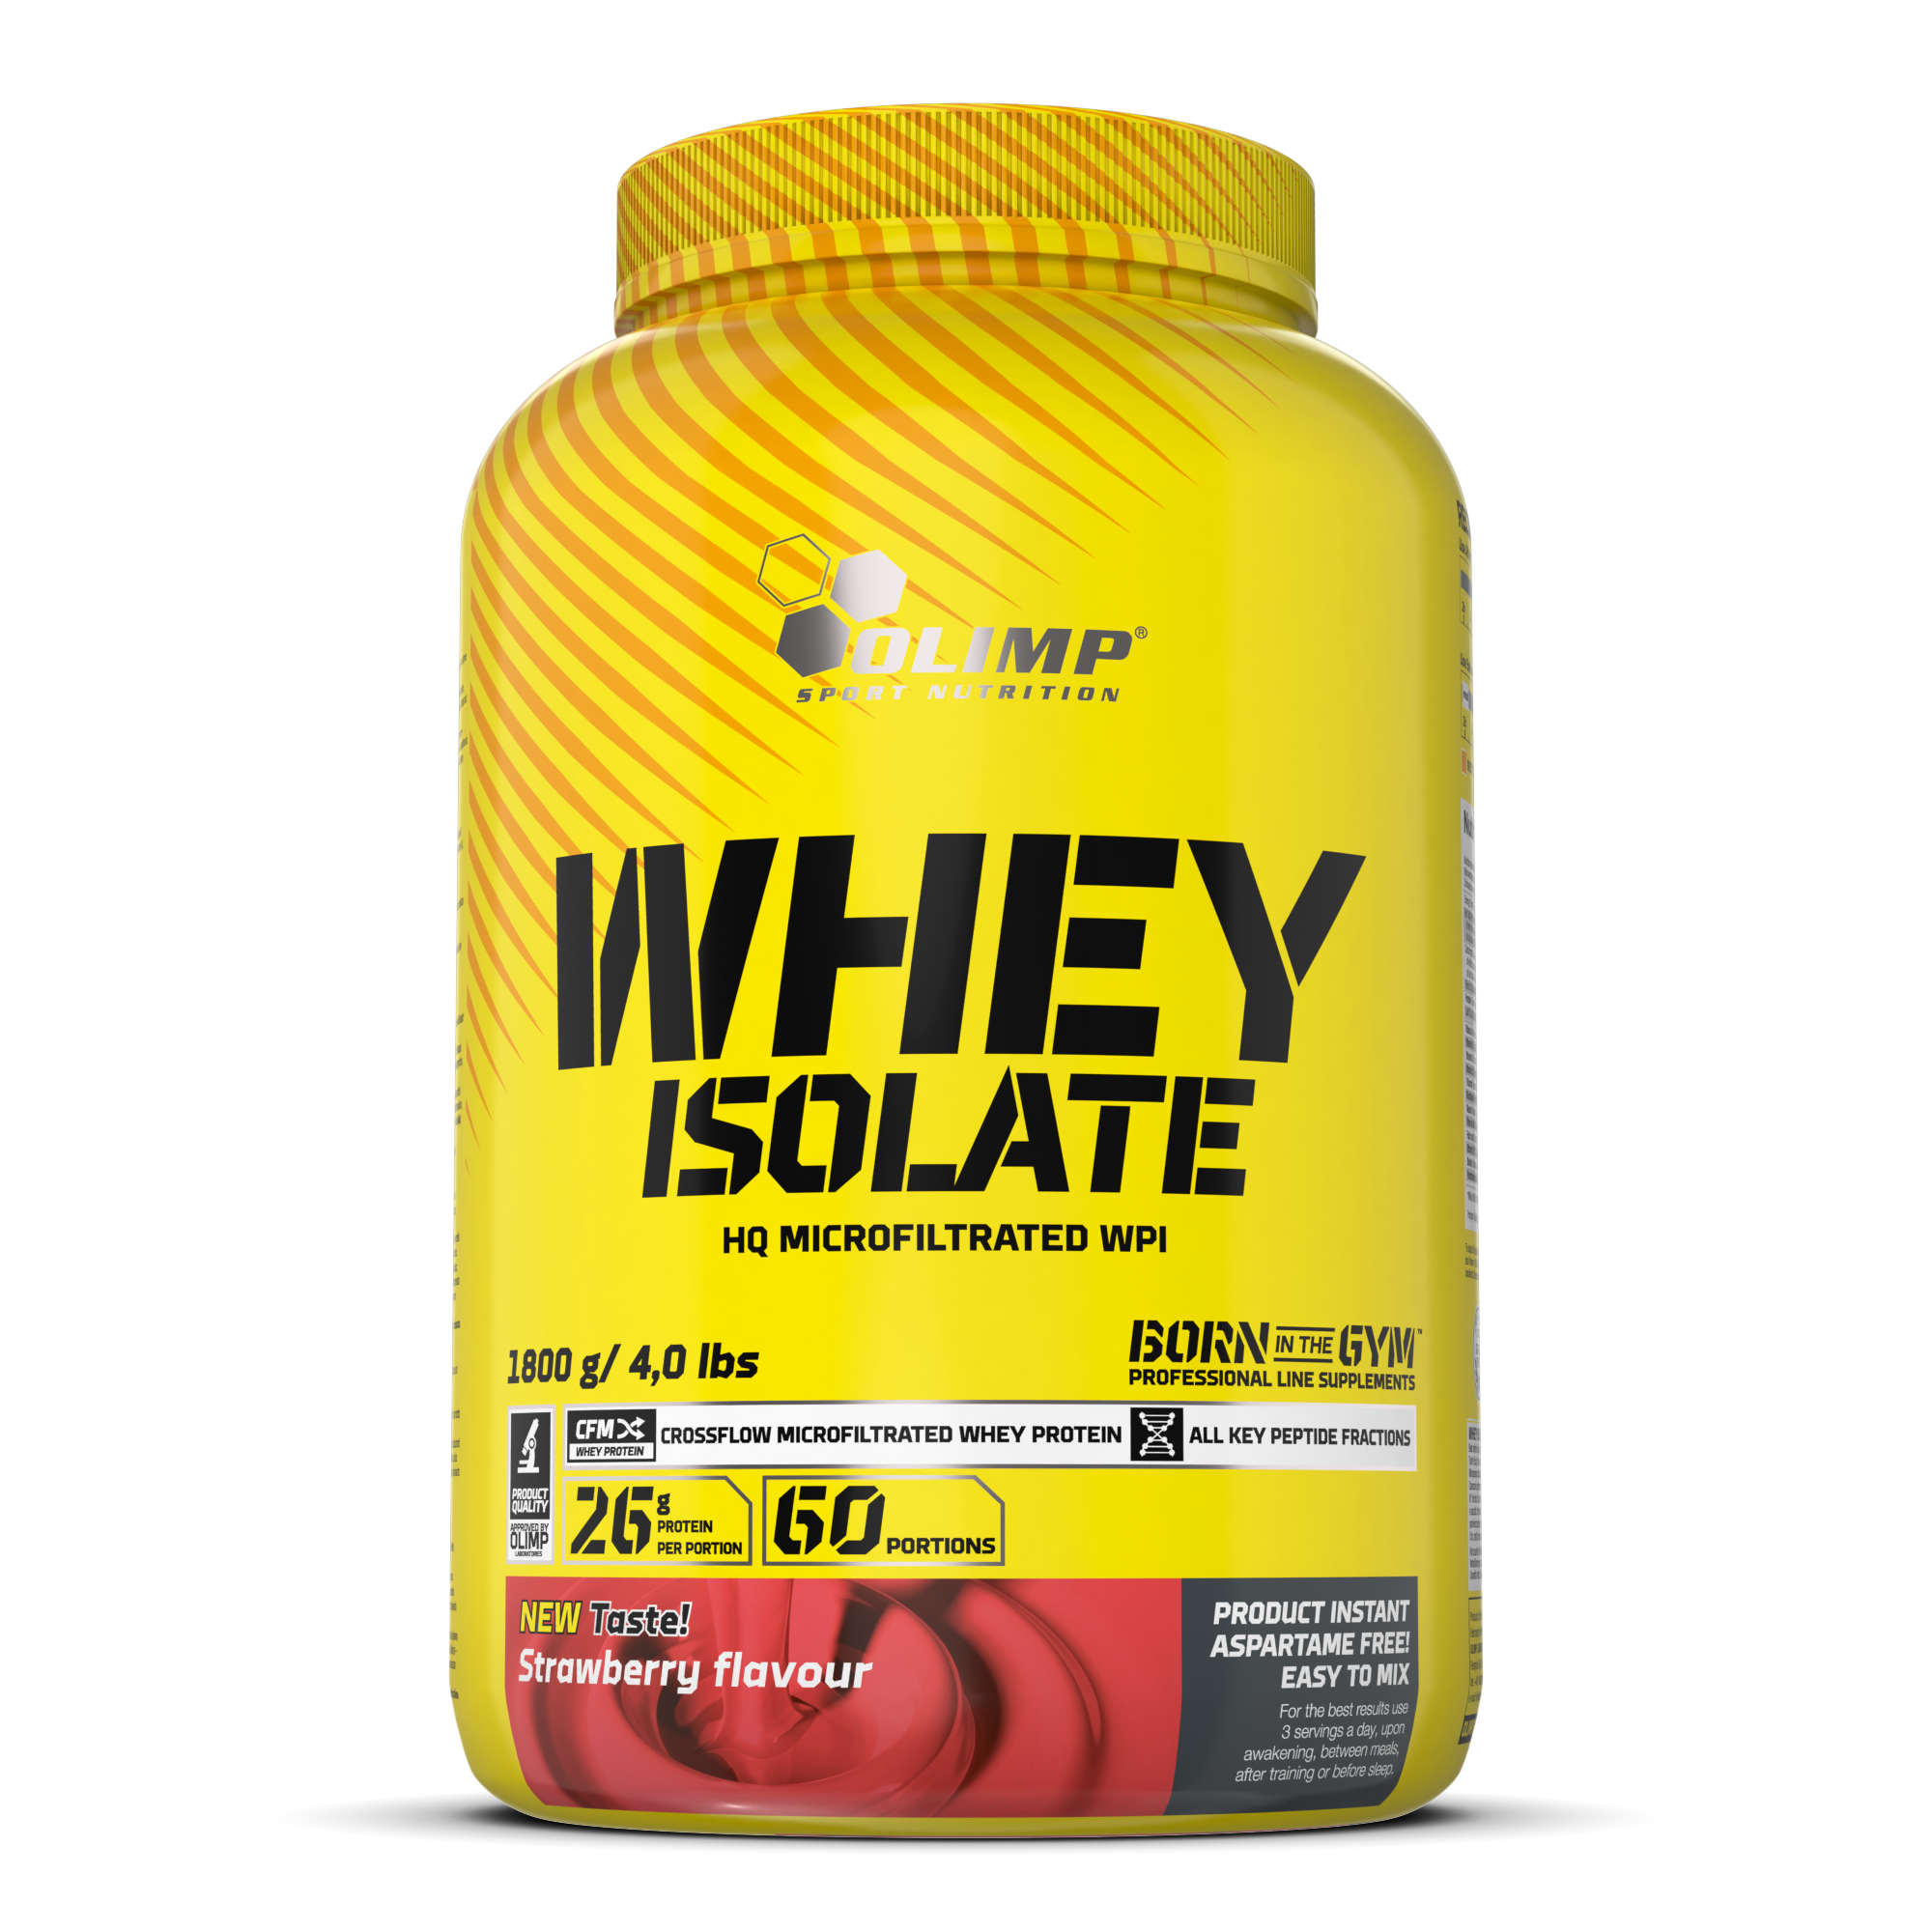 OL PURE WHEY ISOLATE PROTEIN CILEK 1800g